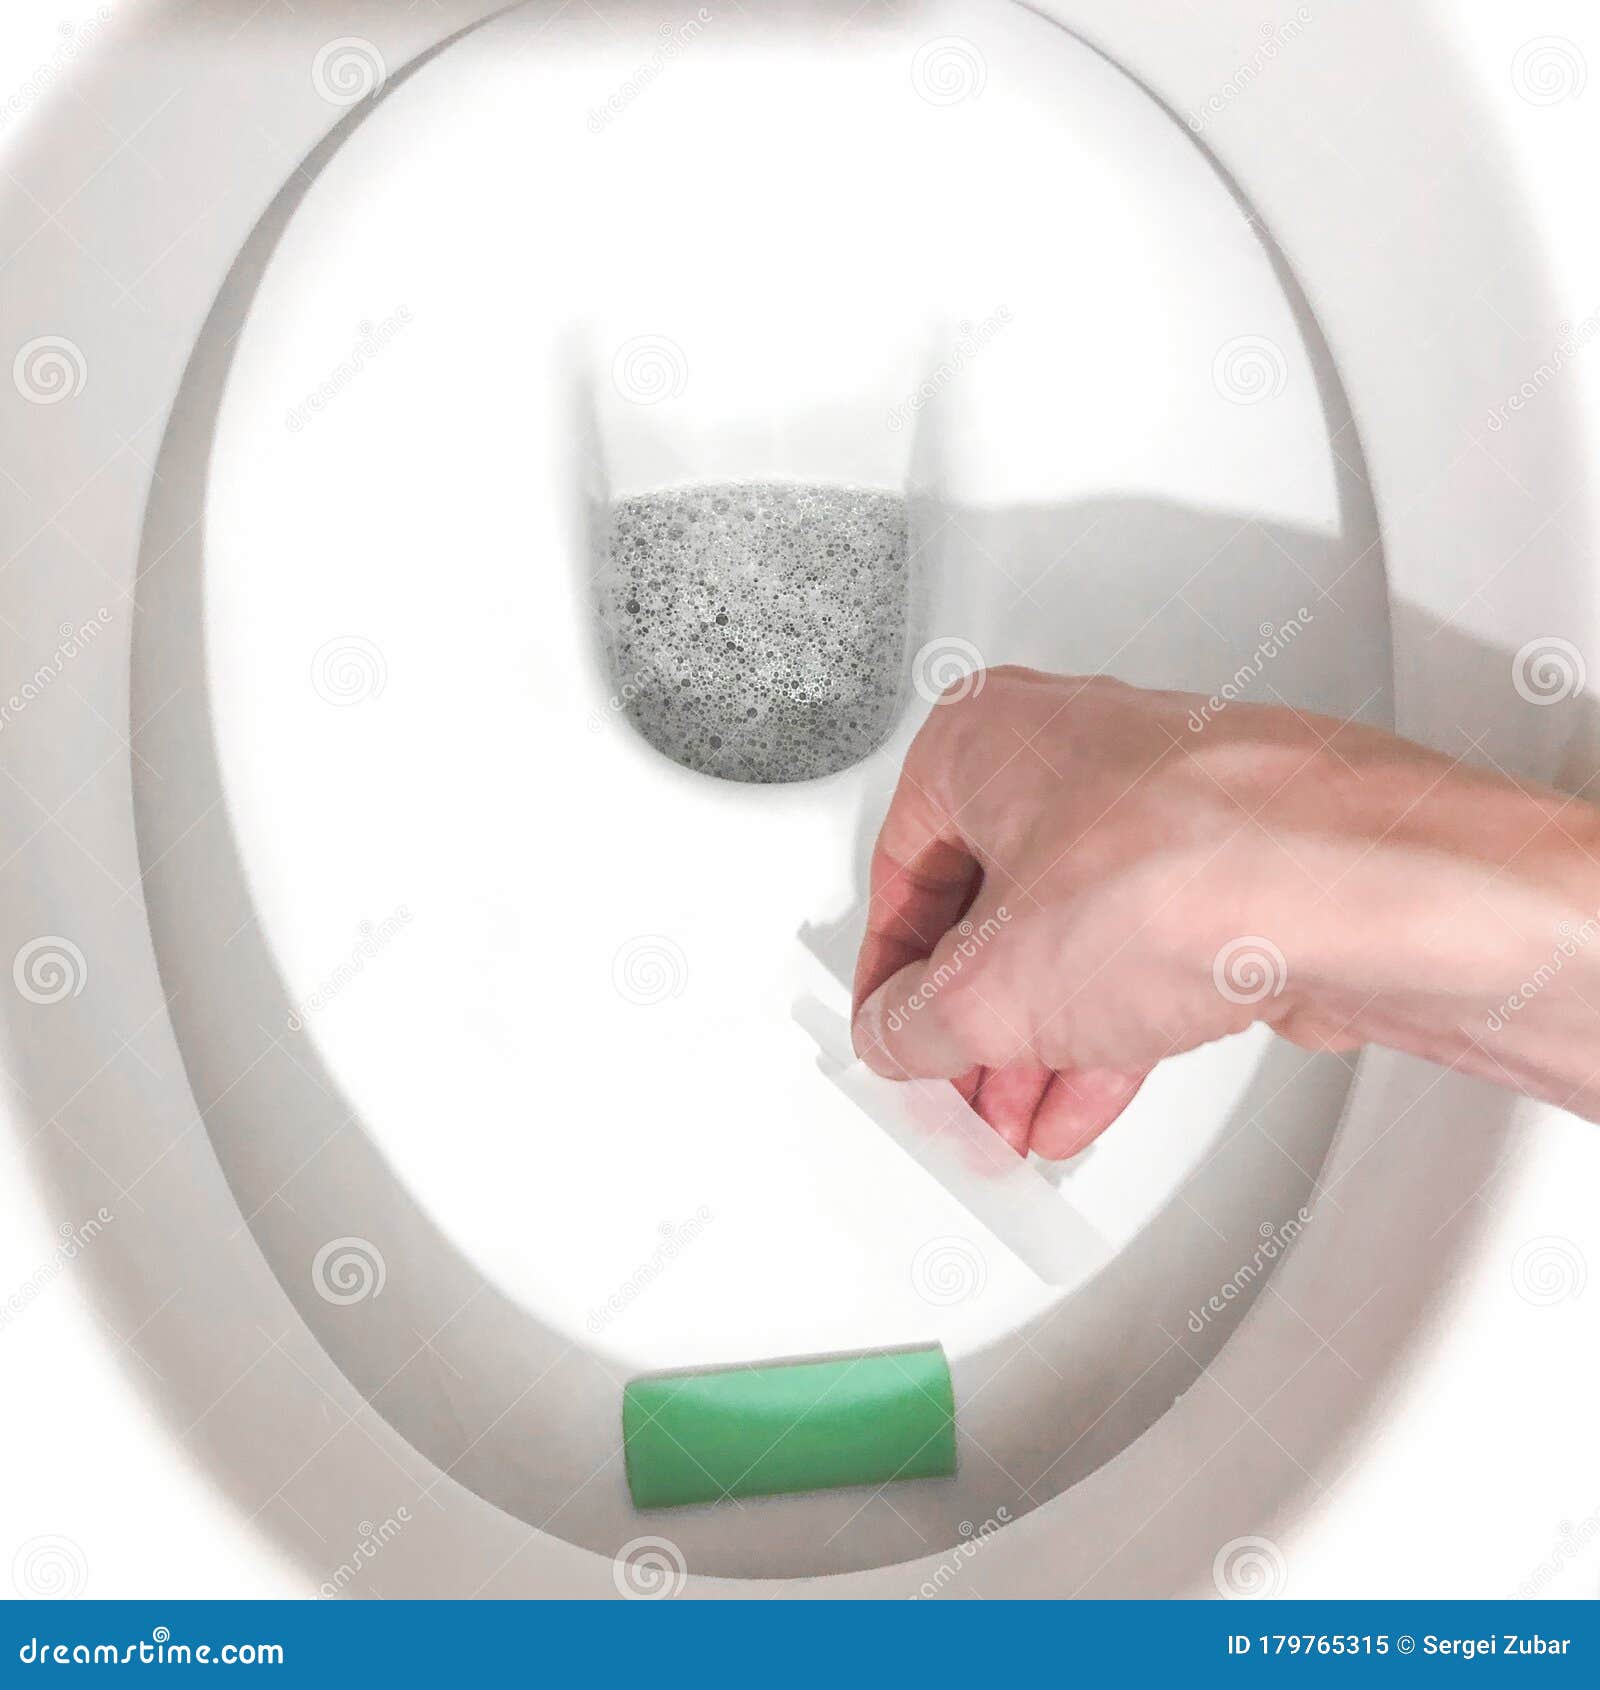 Toilet and Toilet Unit. Toilet Hygiene. Rim Block. Disinfection of the  Toilet Stock Image - Image of freshen, disinfect: 179765315